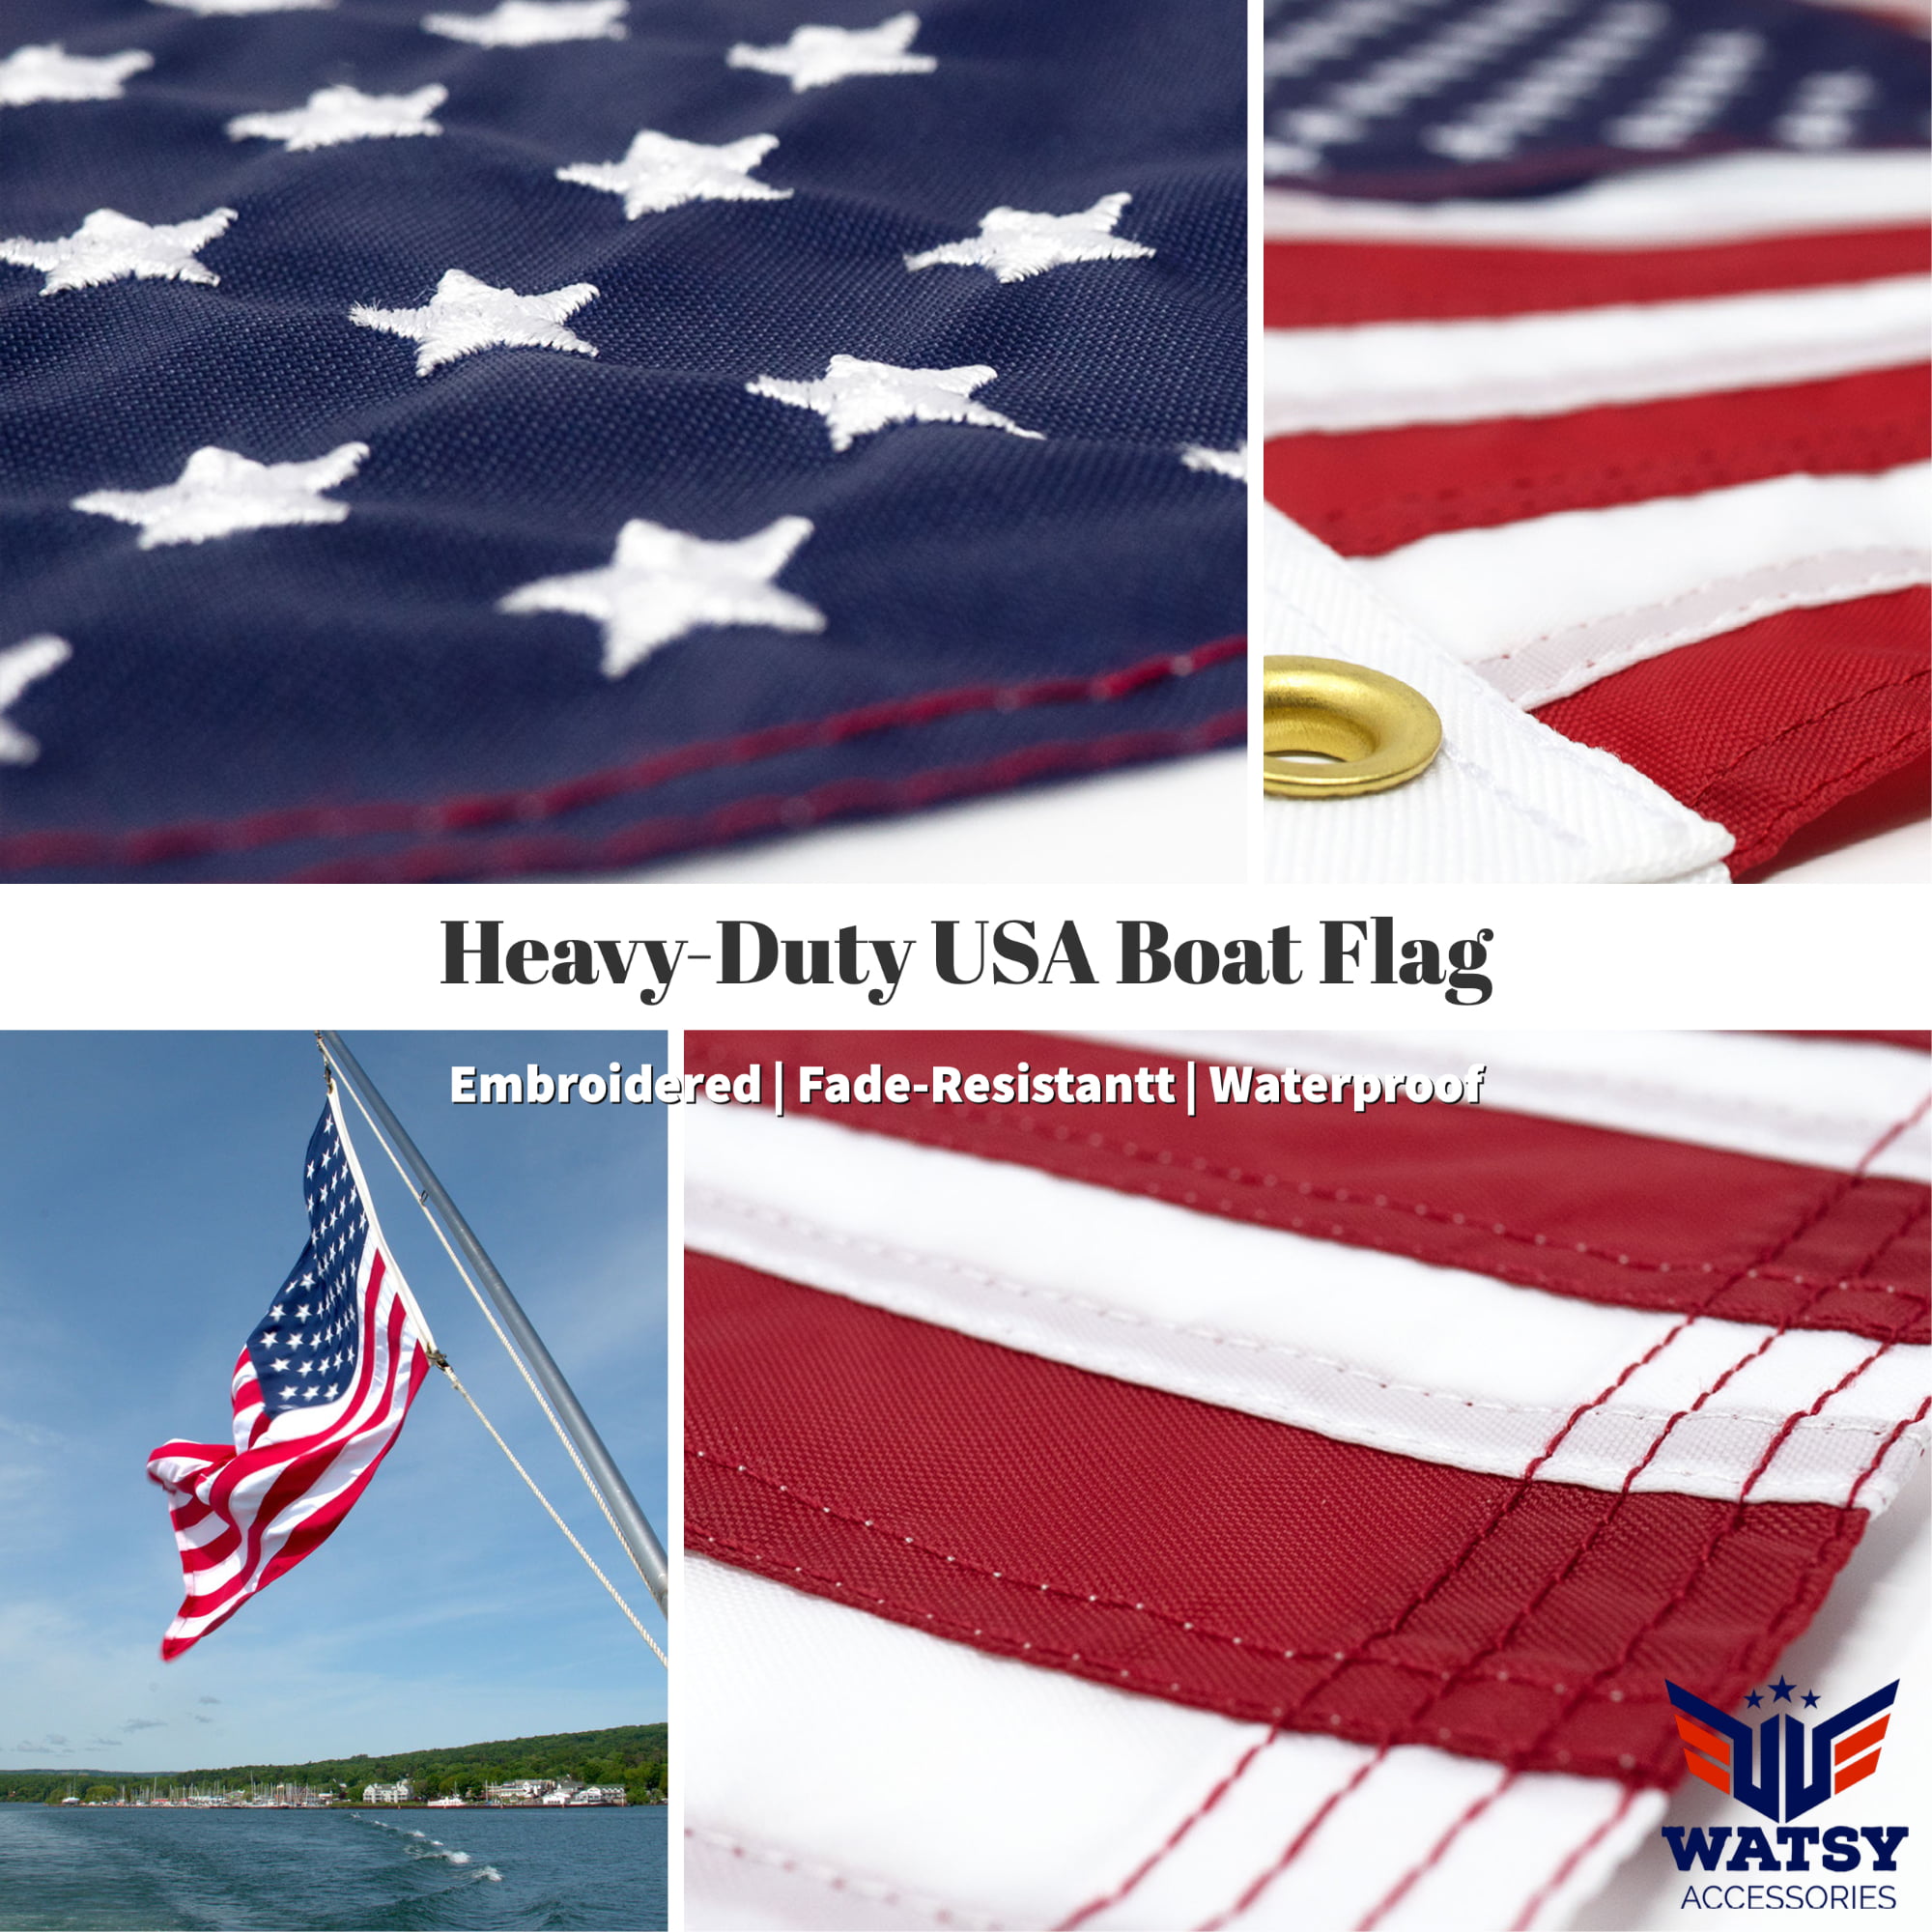 US ARMY OFFICIAL 12x18 150D Nylon Boat Flag UV Protected Waterproof HISTORIC 